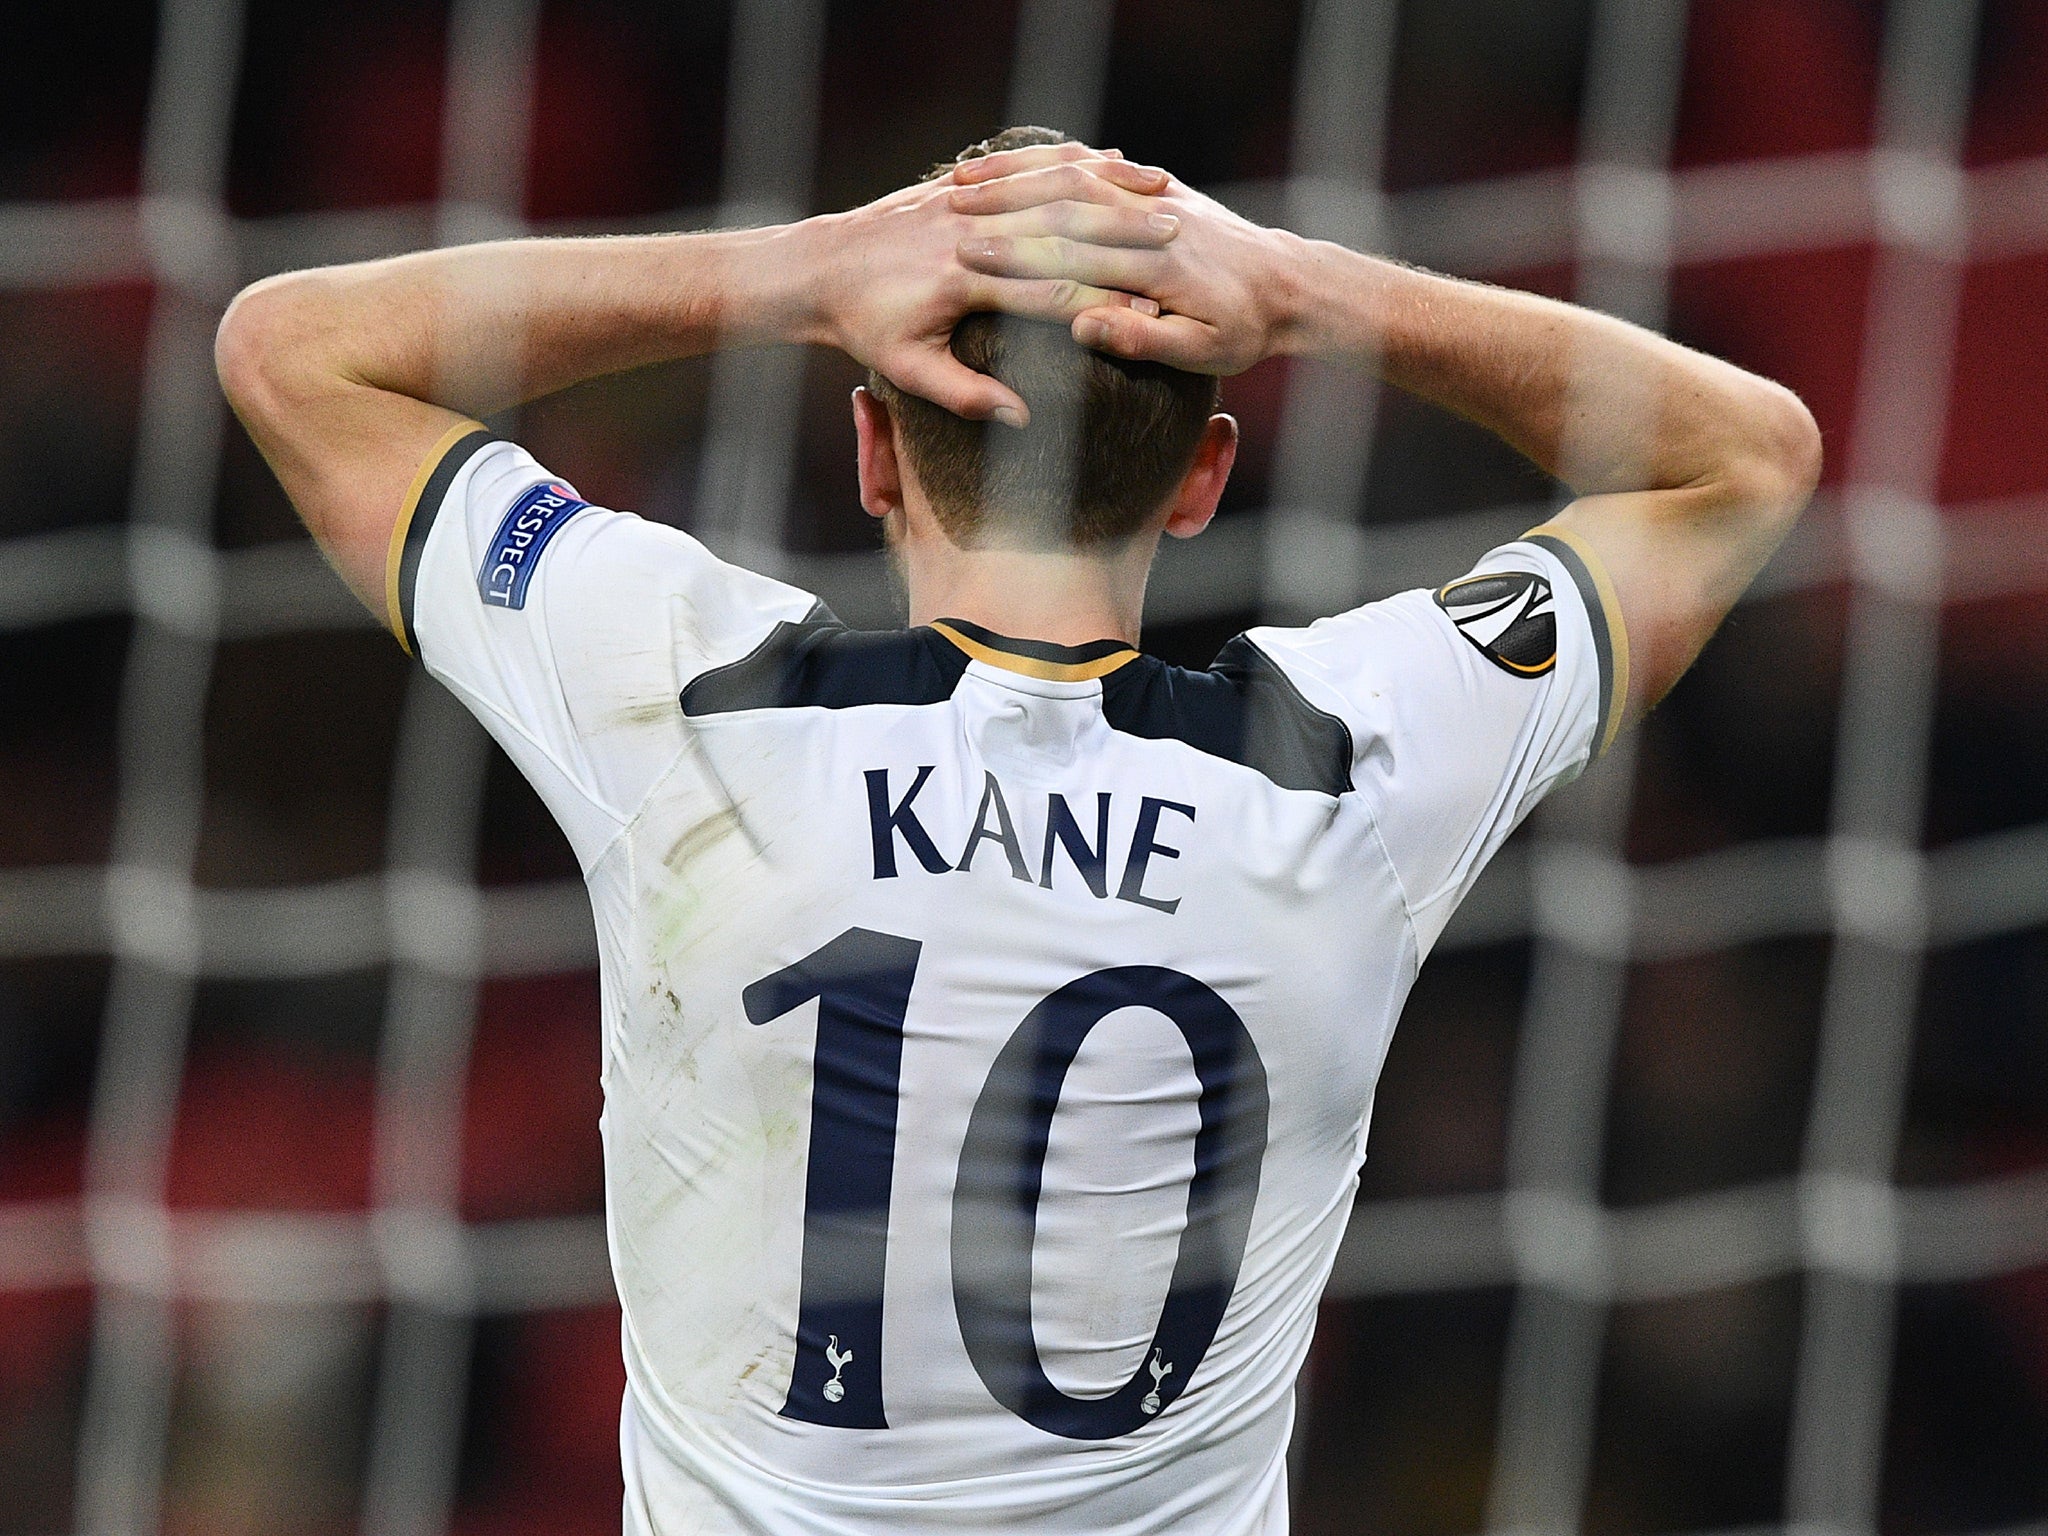 Harry Kane could not hide his disappointment at the final whistle